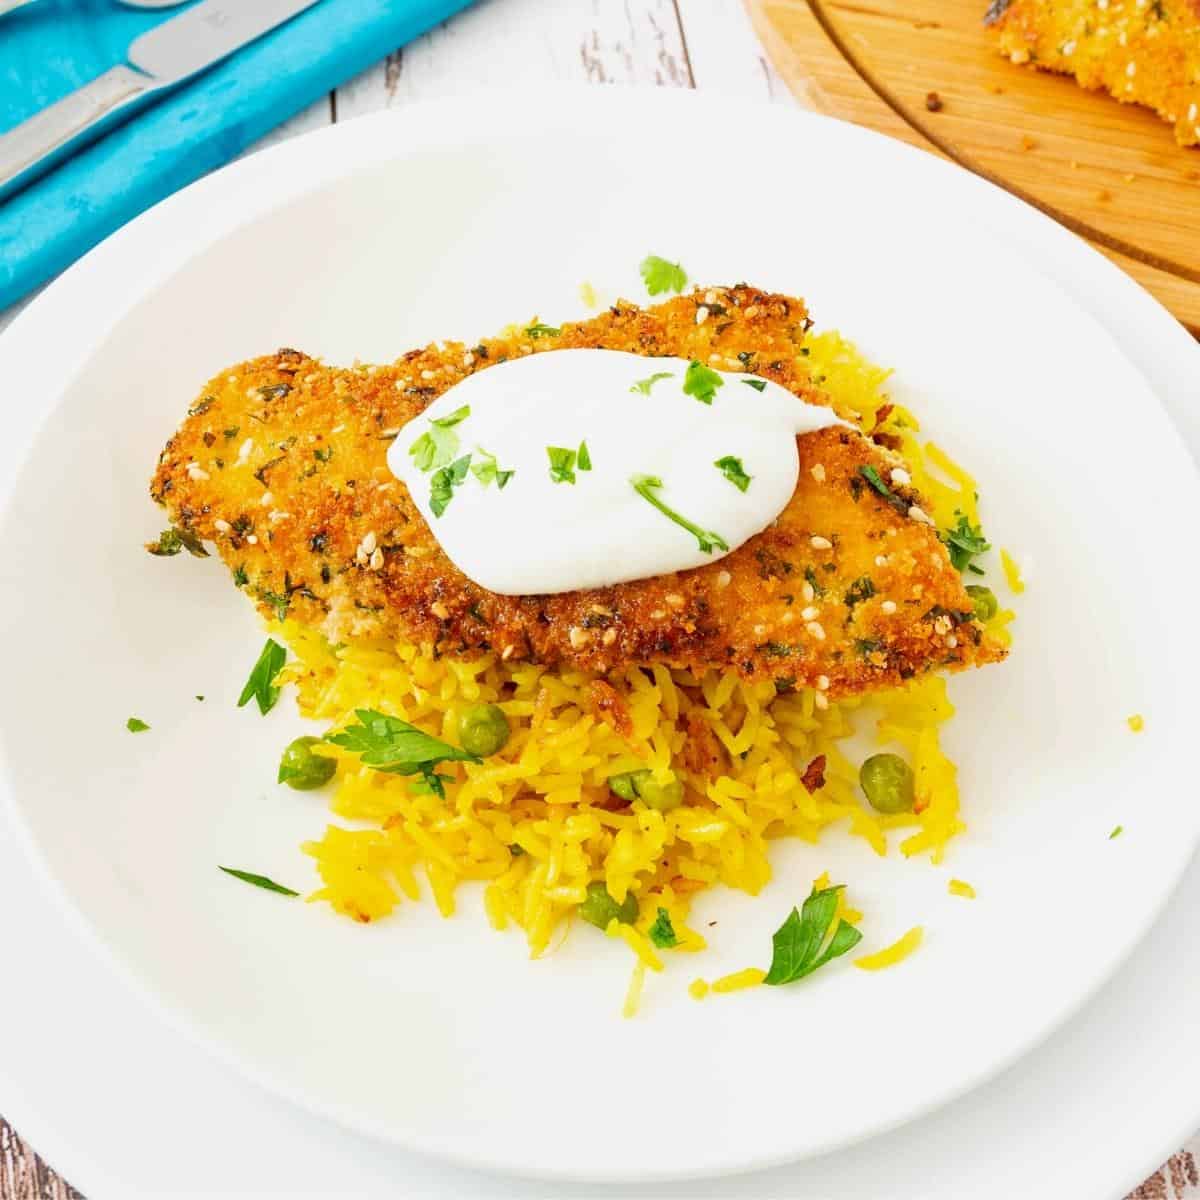 A plate with breaded chicken and turmeric rice.